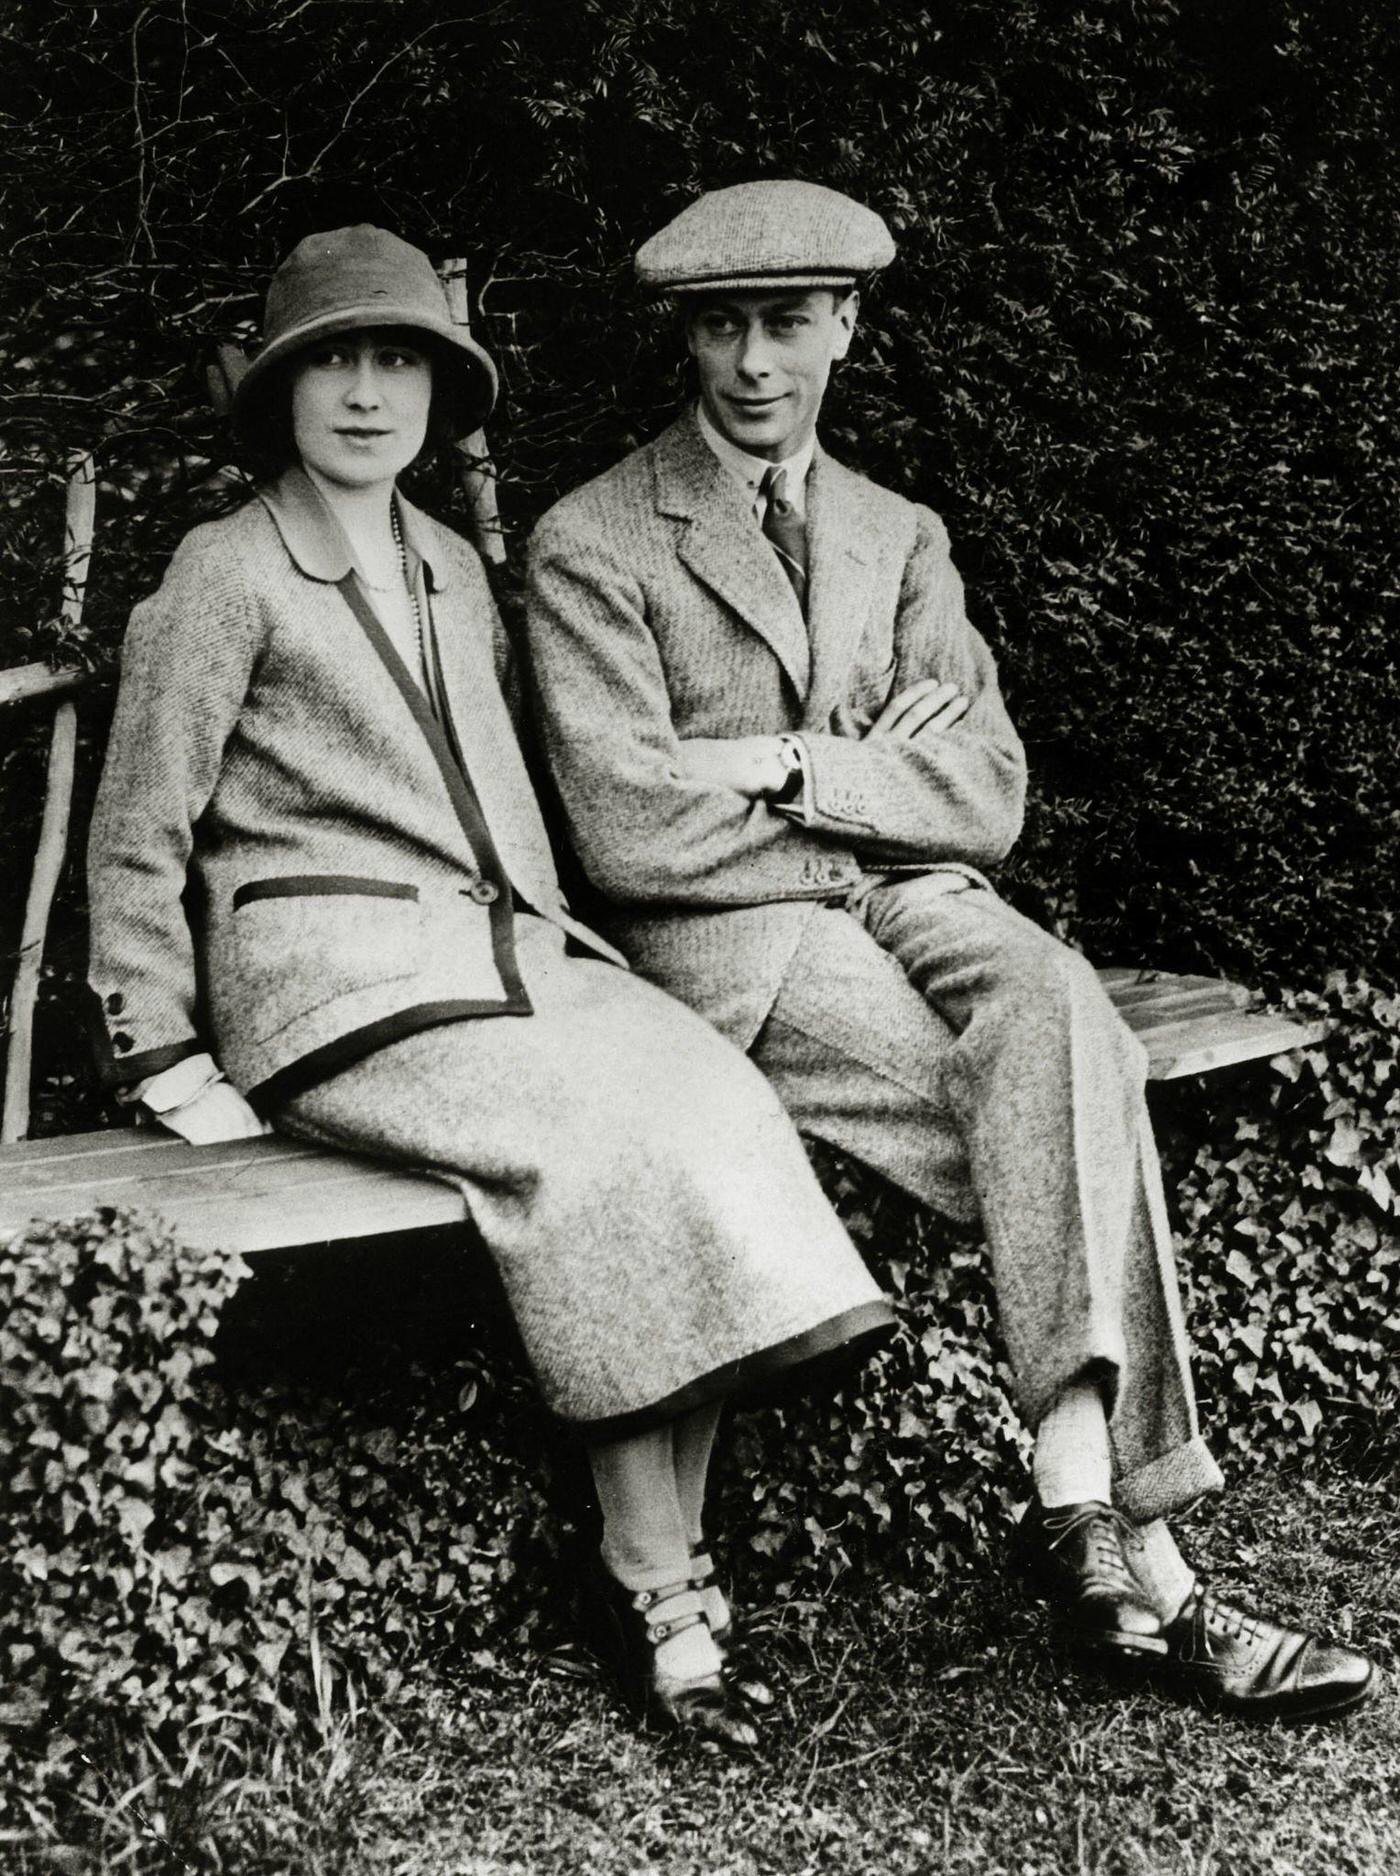 Duke and Duchess of York at Polesden Lacey during their honeymoon, Duke became King George VI